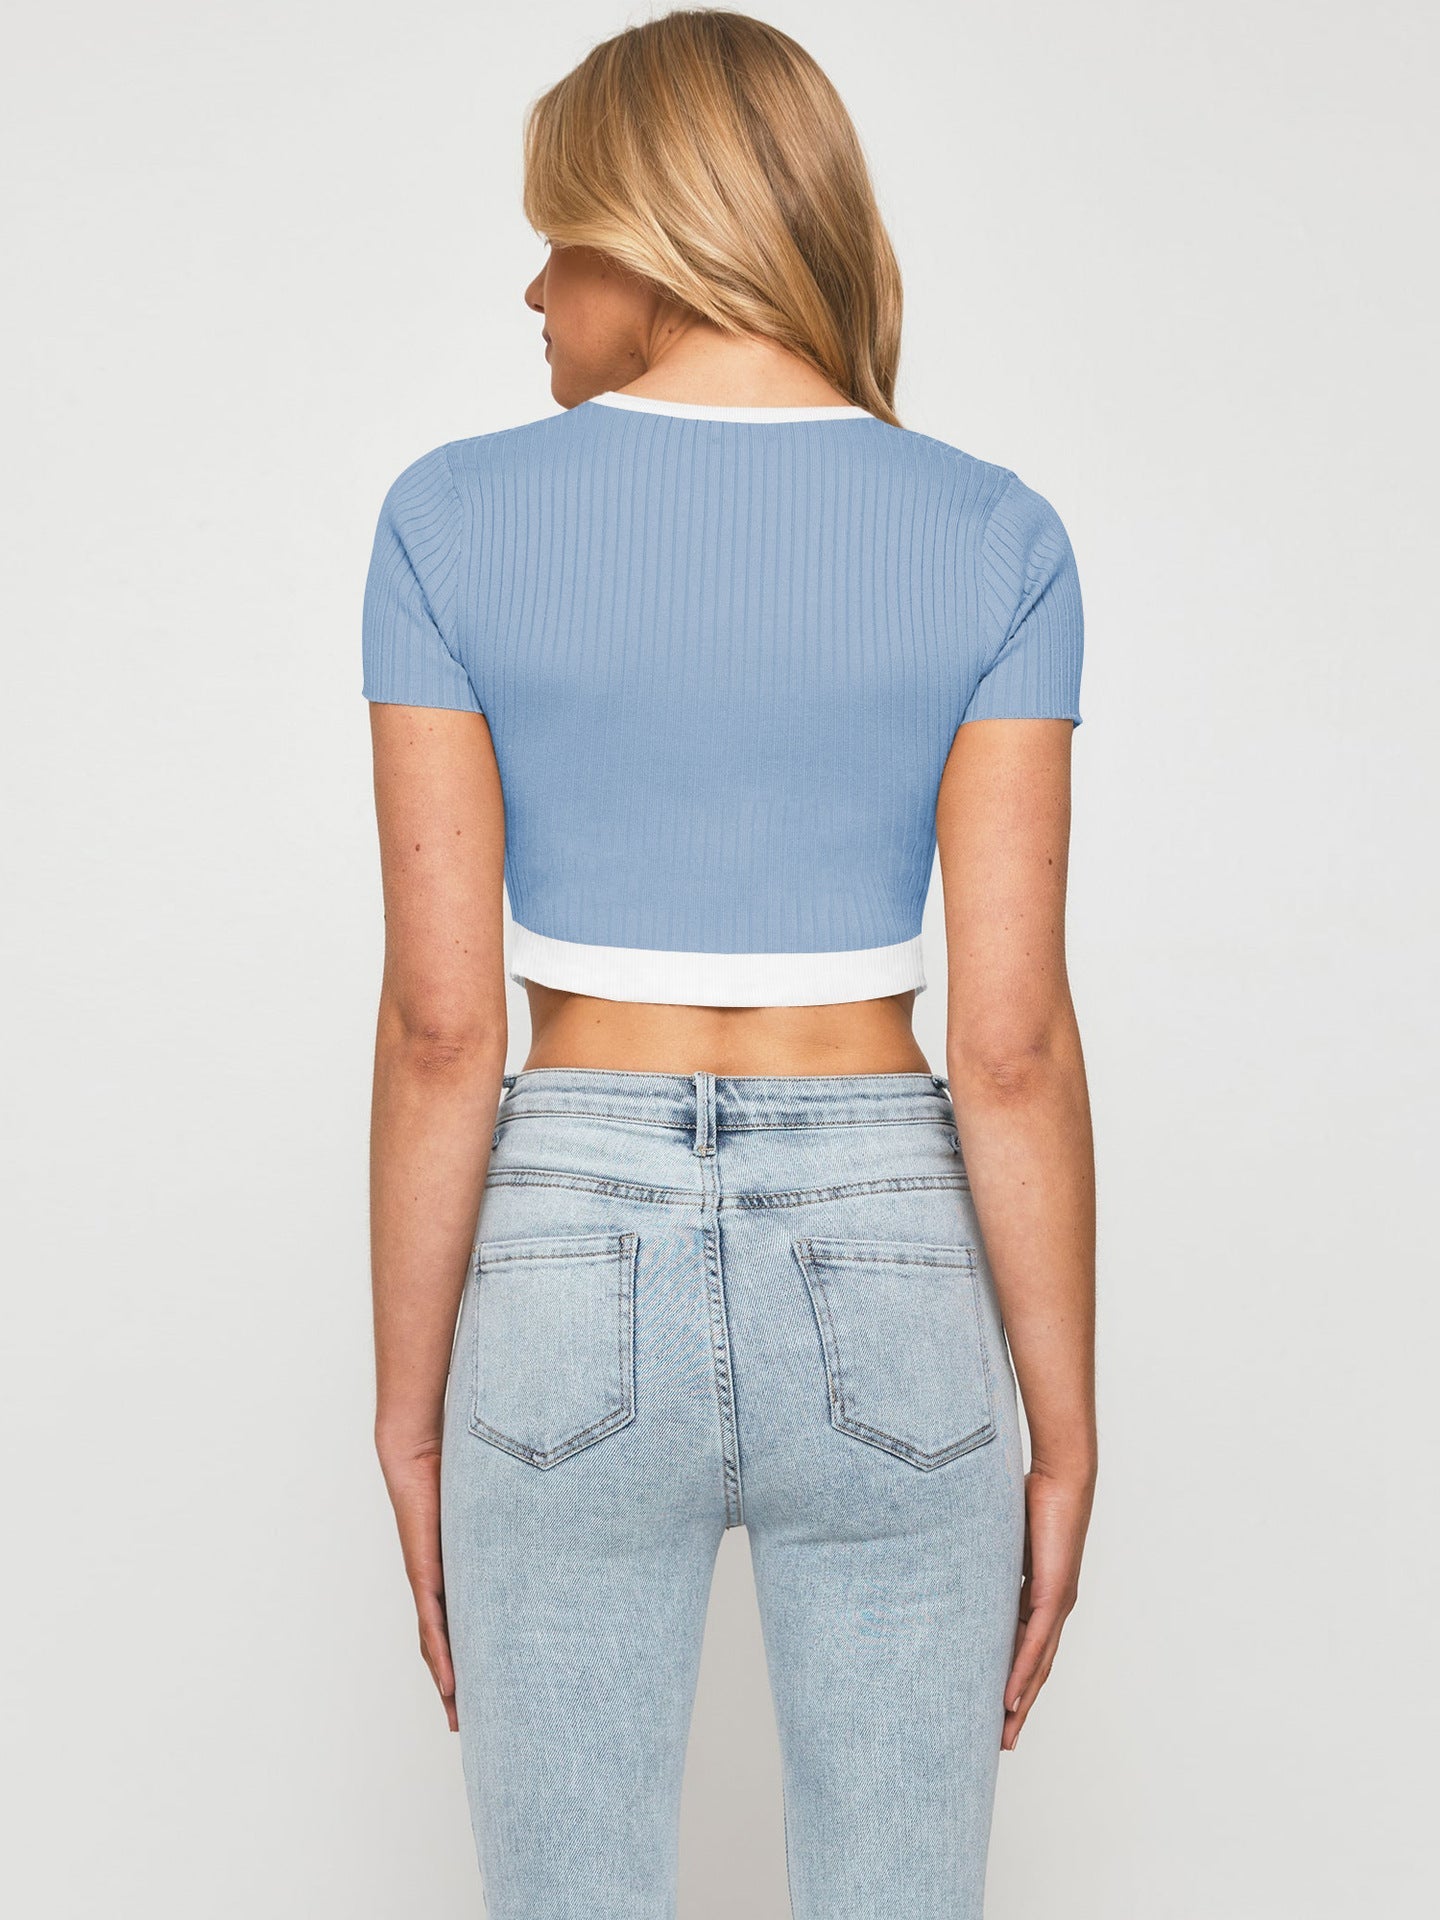 Trim Pointed Hem Ribbed Crop Top - Women’s Clothing & Accessories - Shirts & Tops - 6 - 2024